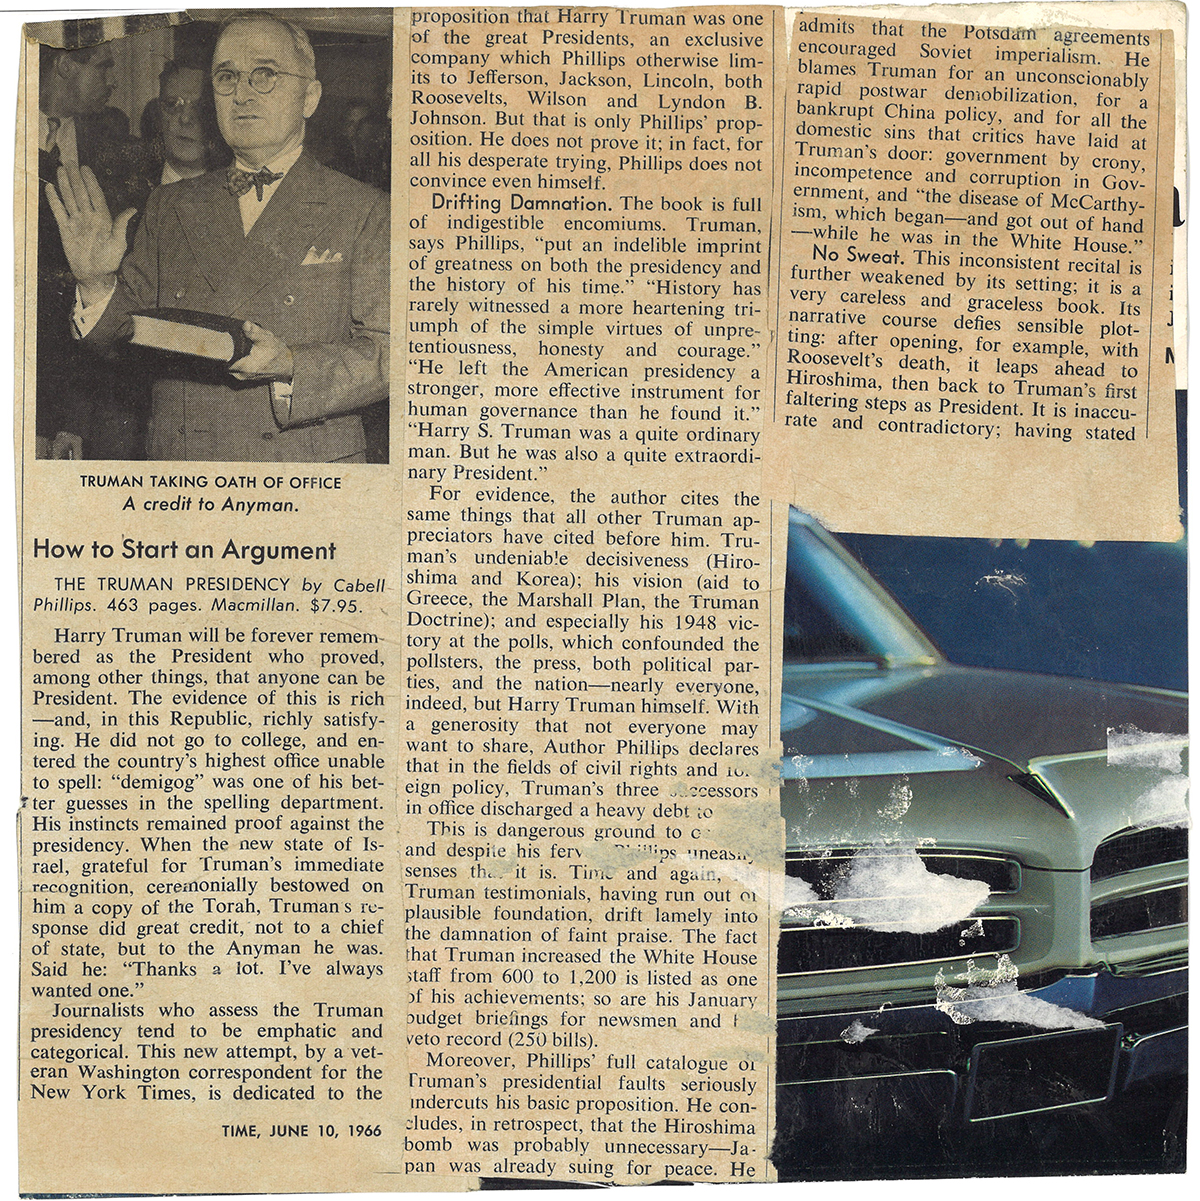 TIME Review of The Truman Presidency by Cabell Phillips